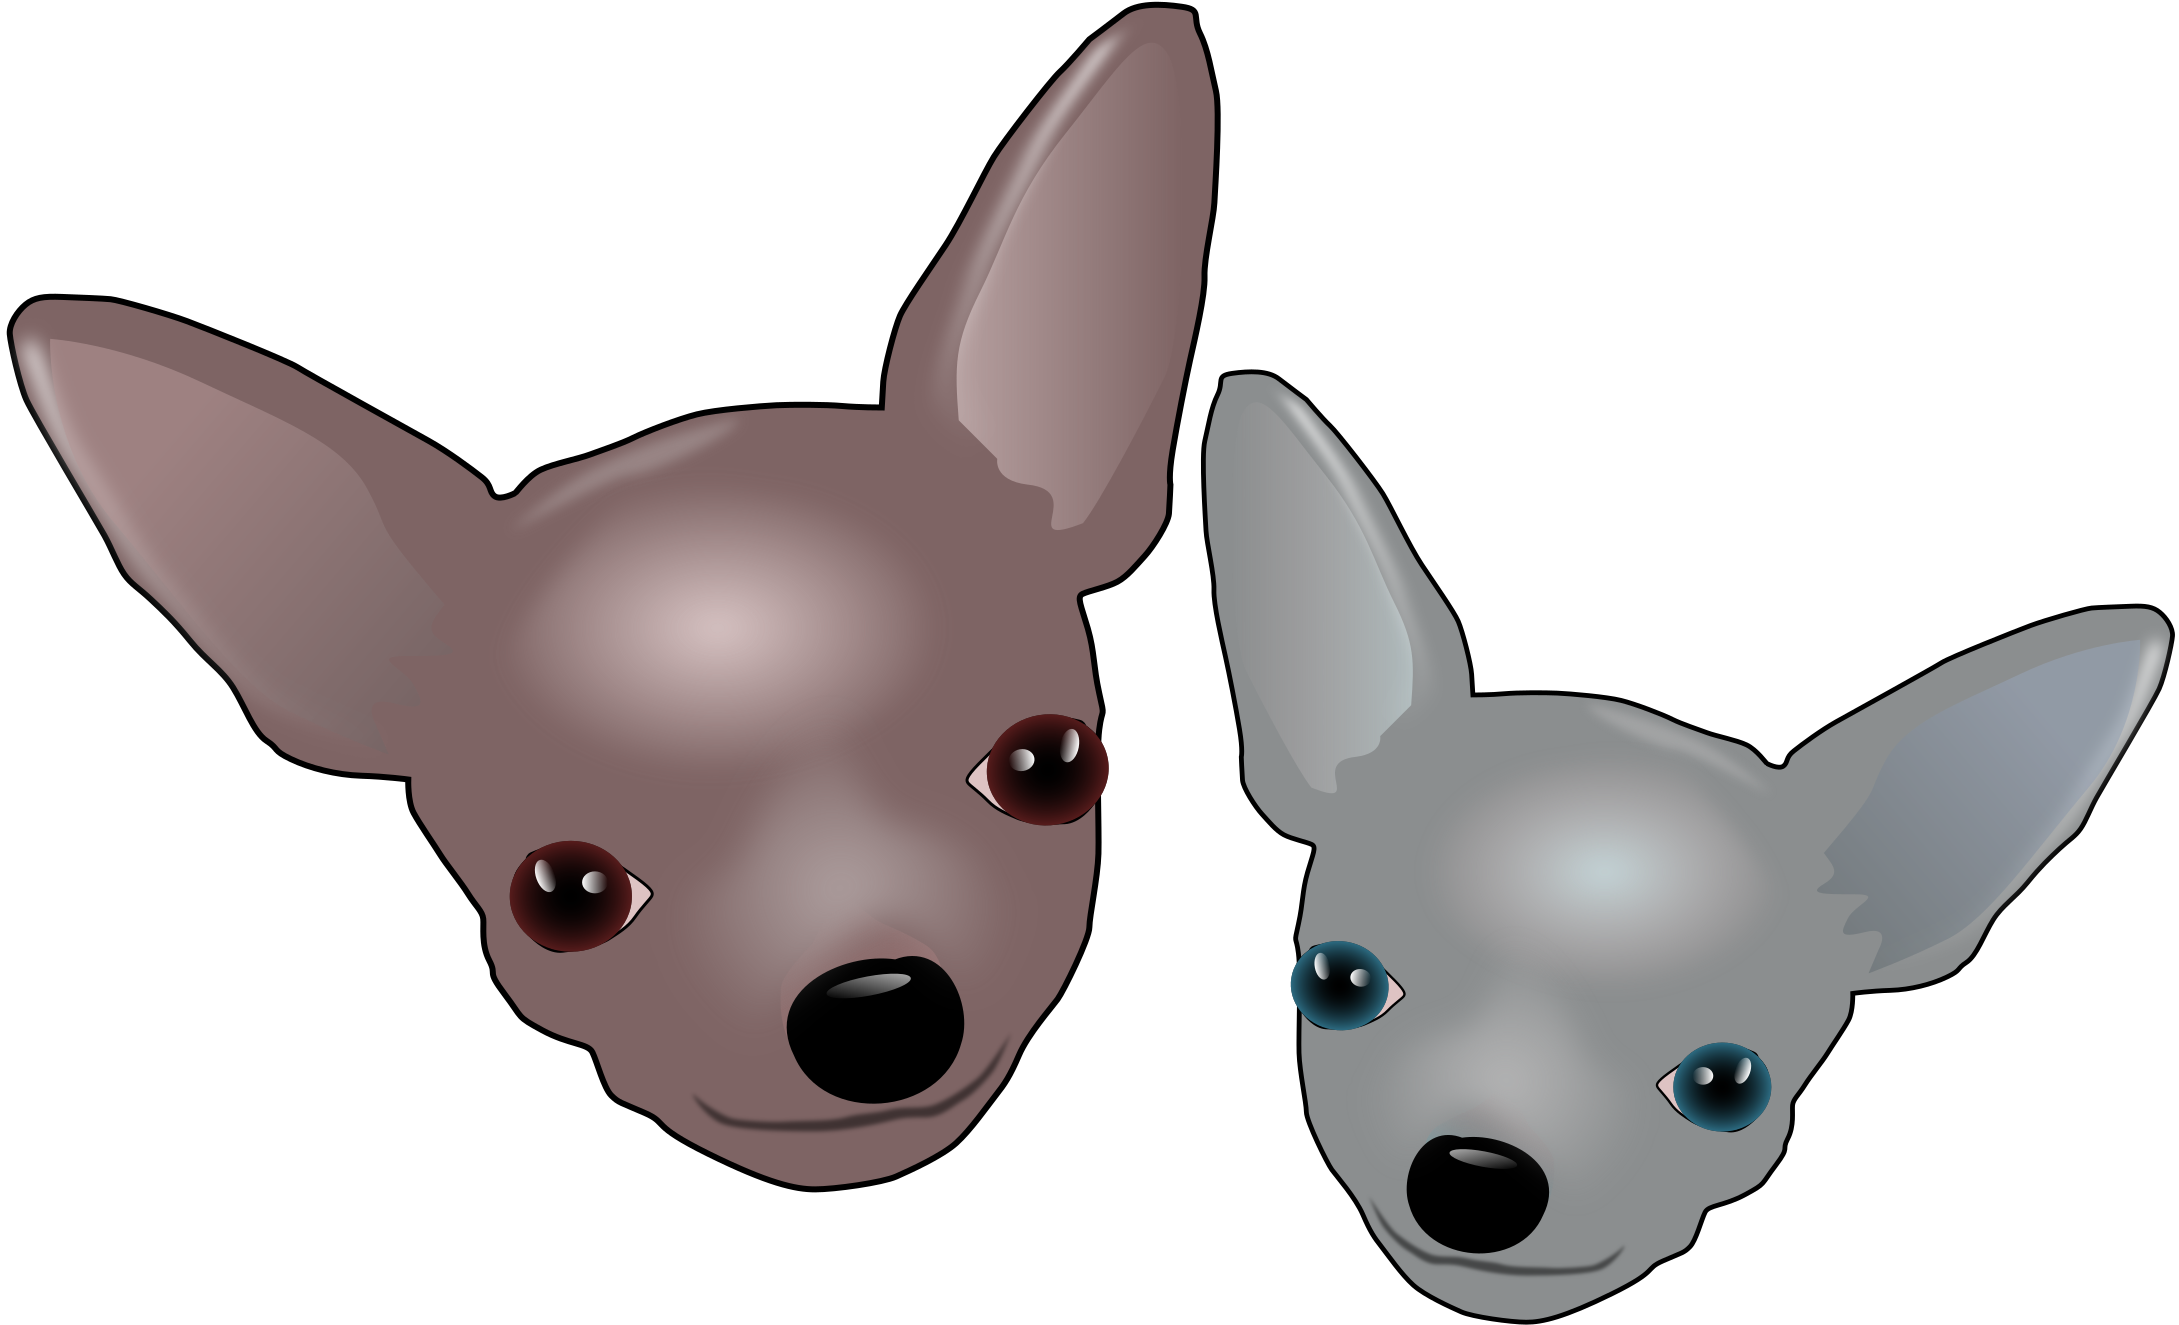 A Couple Of Dogs With Large Ears